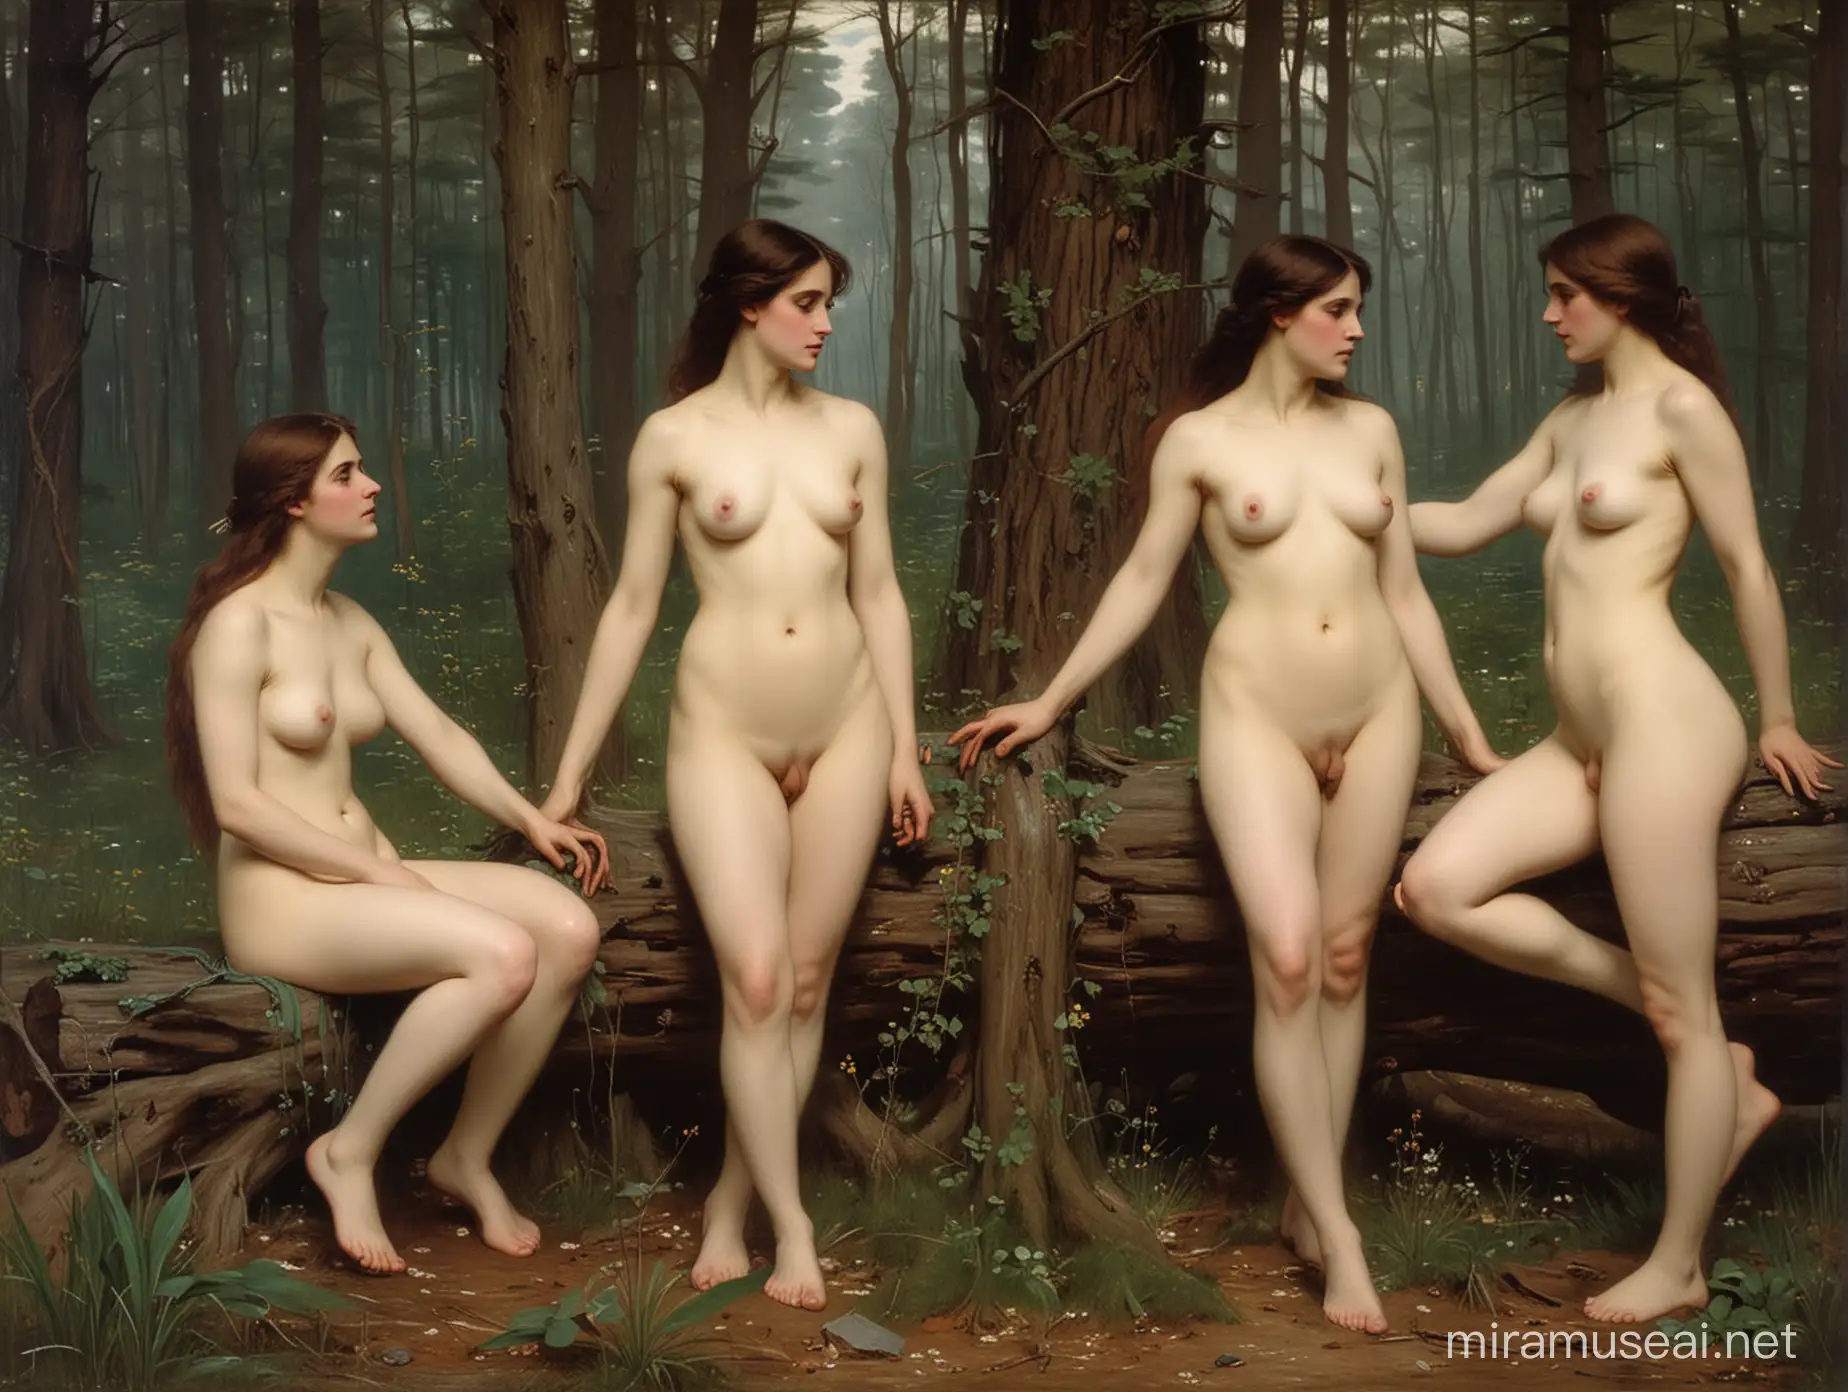 Nude Muses Pose Amidst Enchanted Forest Inspirational Art by John William Waterhouse